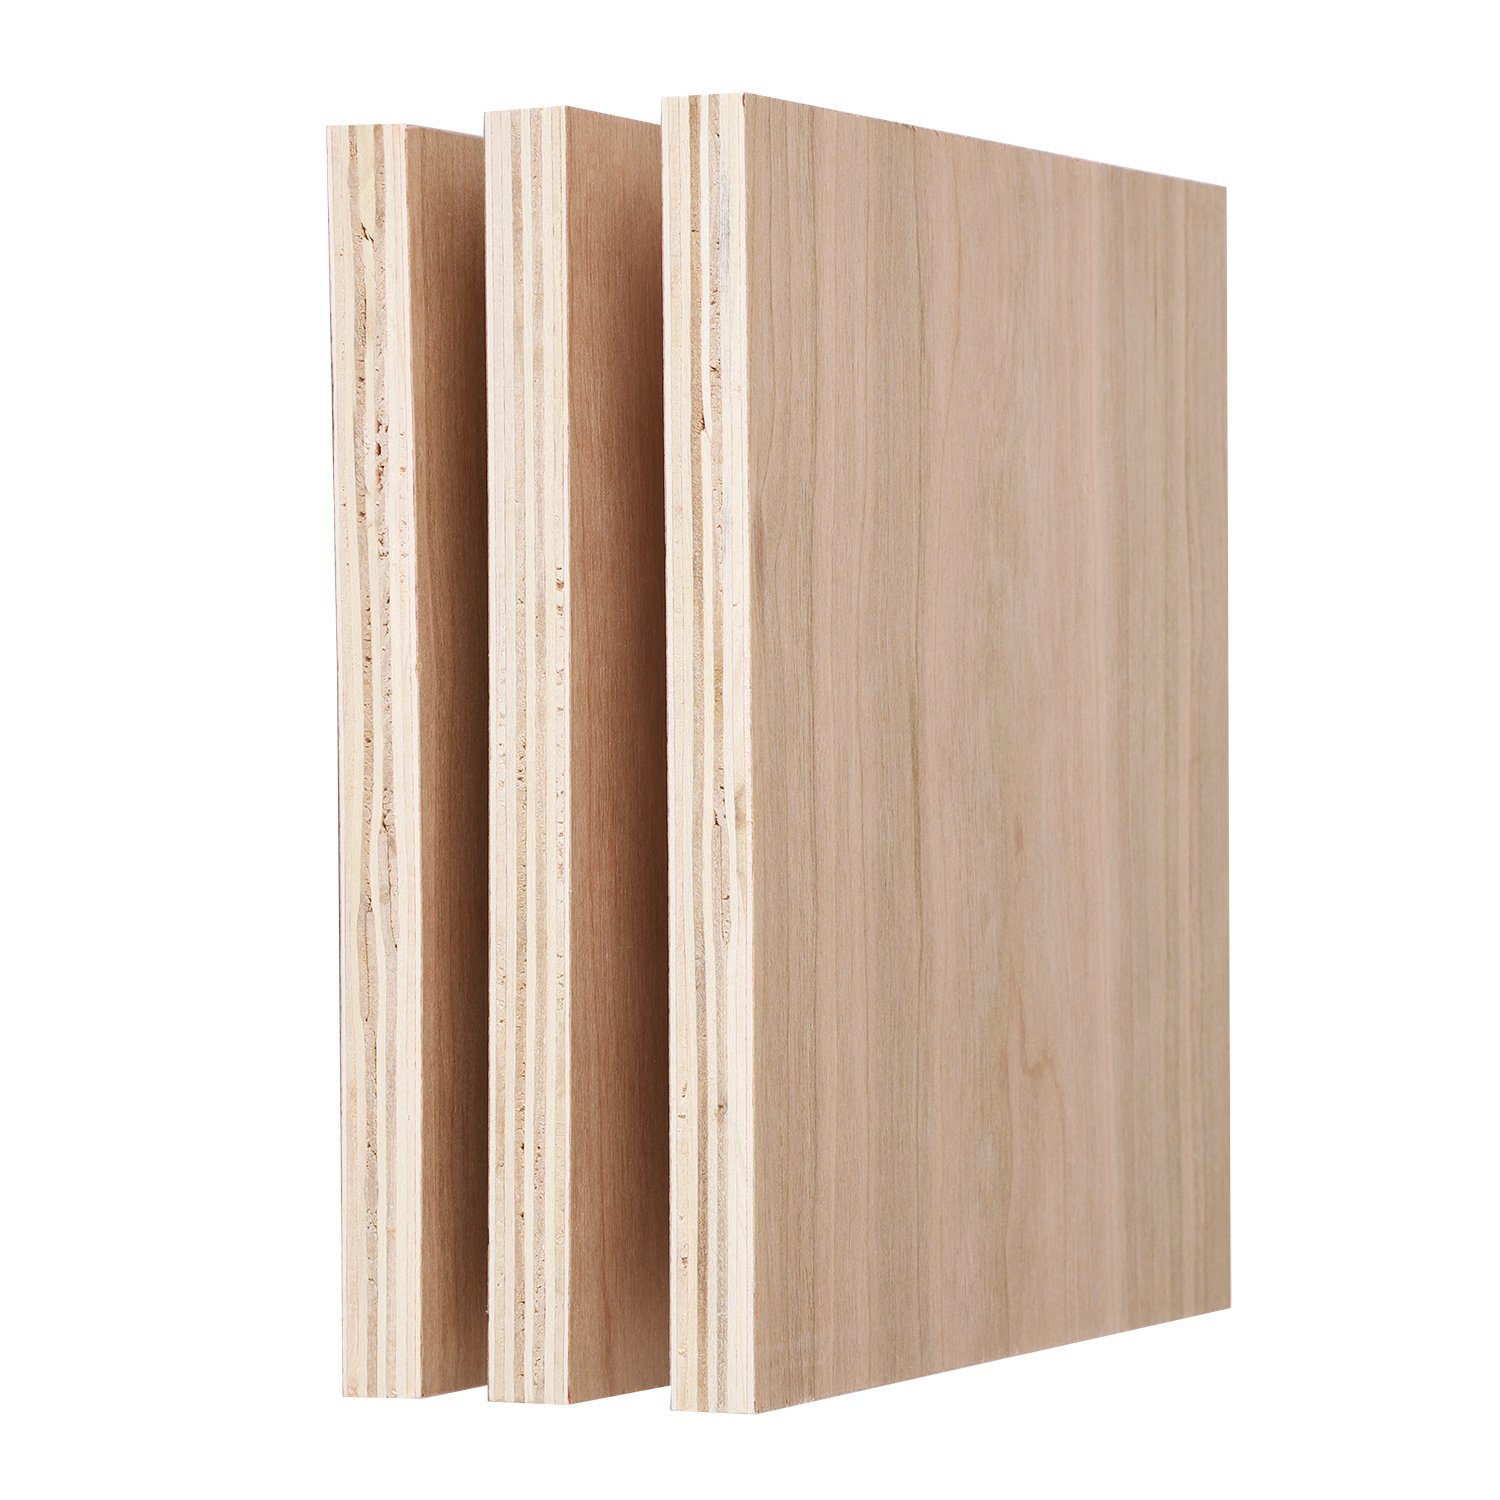 Fancy Commercial Plywood Red Cherry Veneer Faced Plywood for Furniture